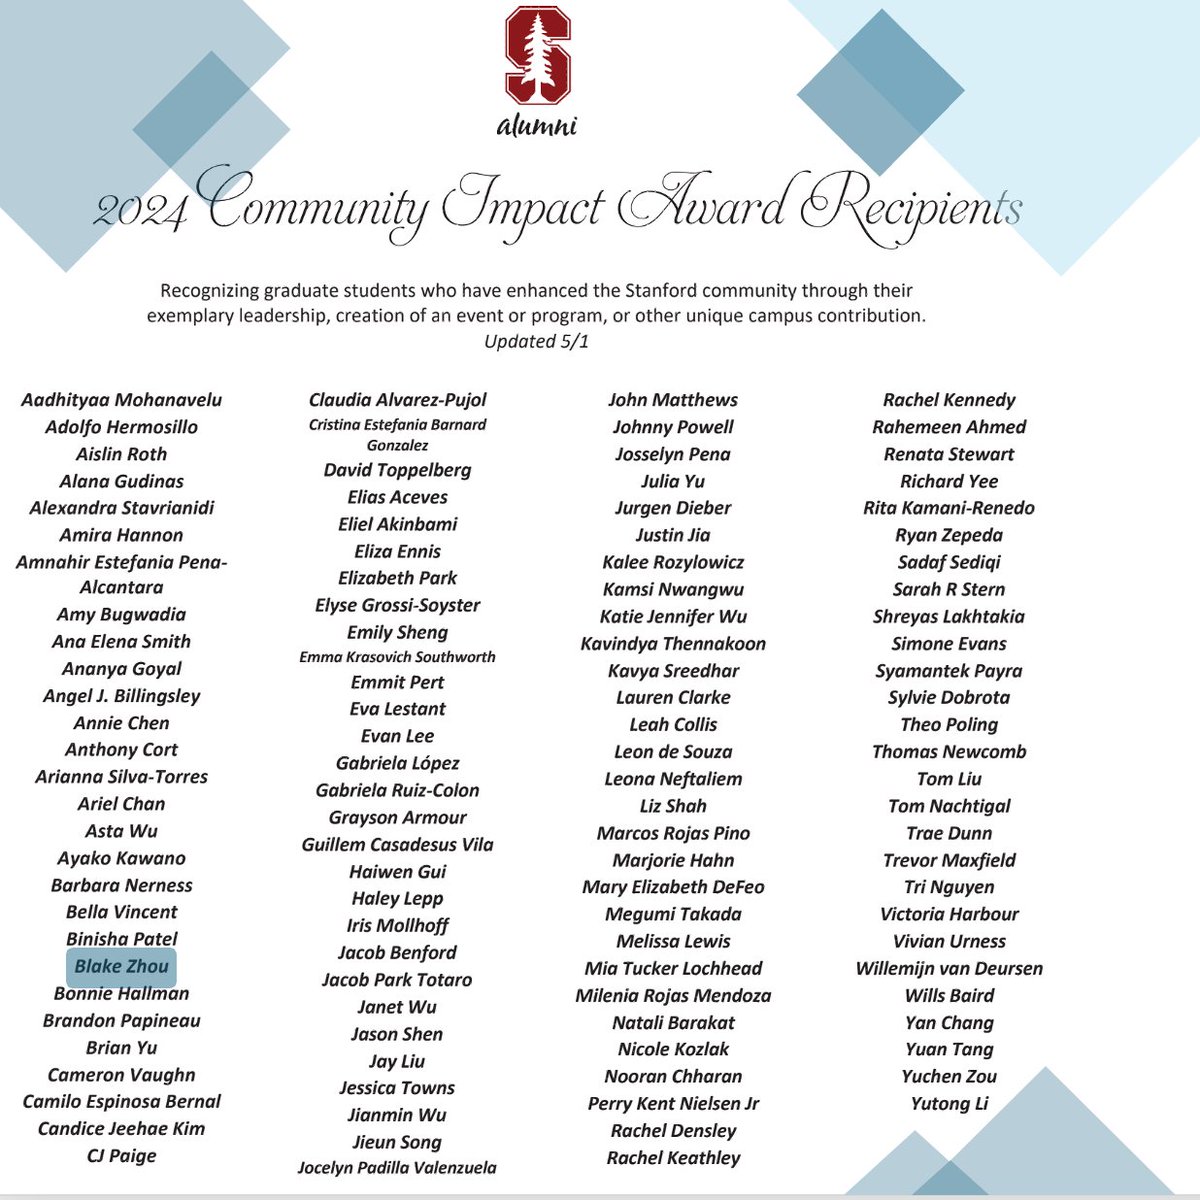 Congratulations to our very own Blake and all recipients of the Community Impact Award!  Well-deserved! @stanfordneurds